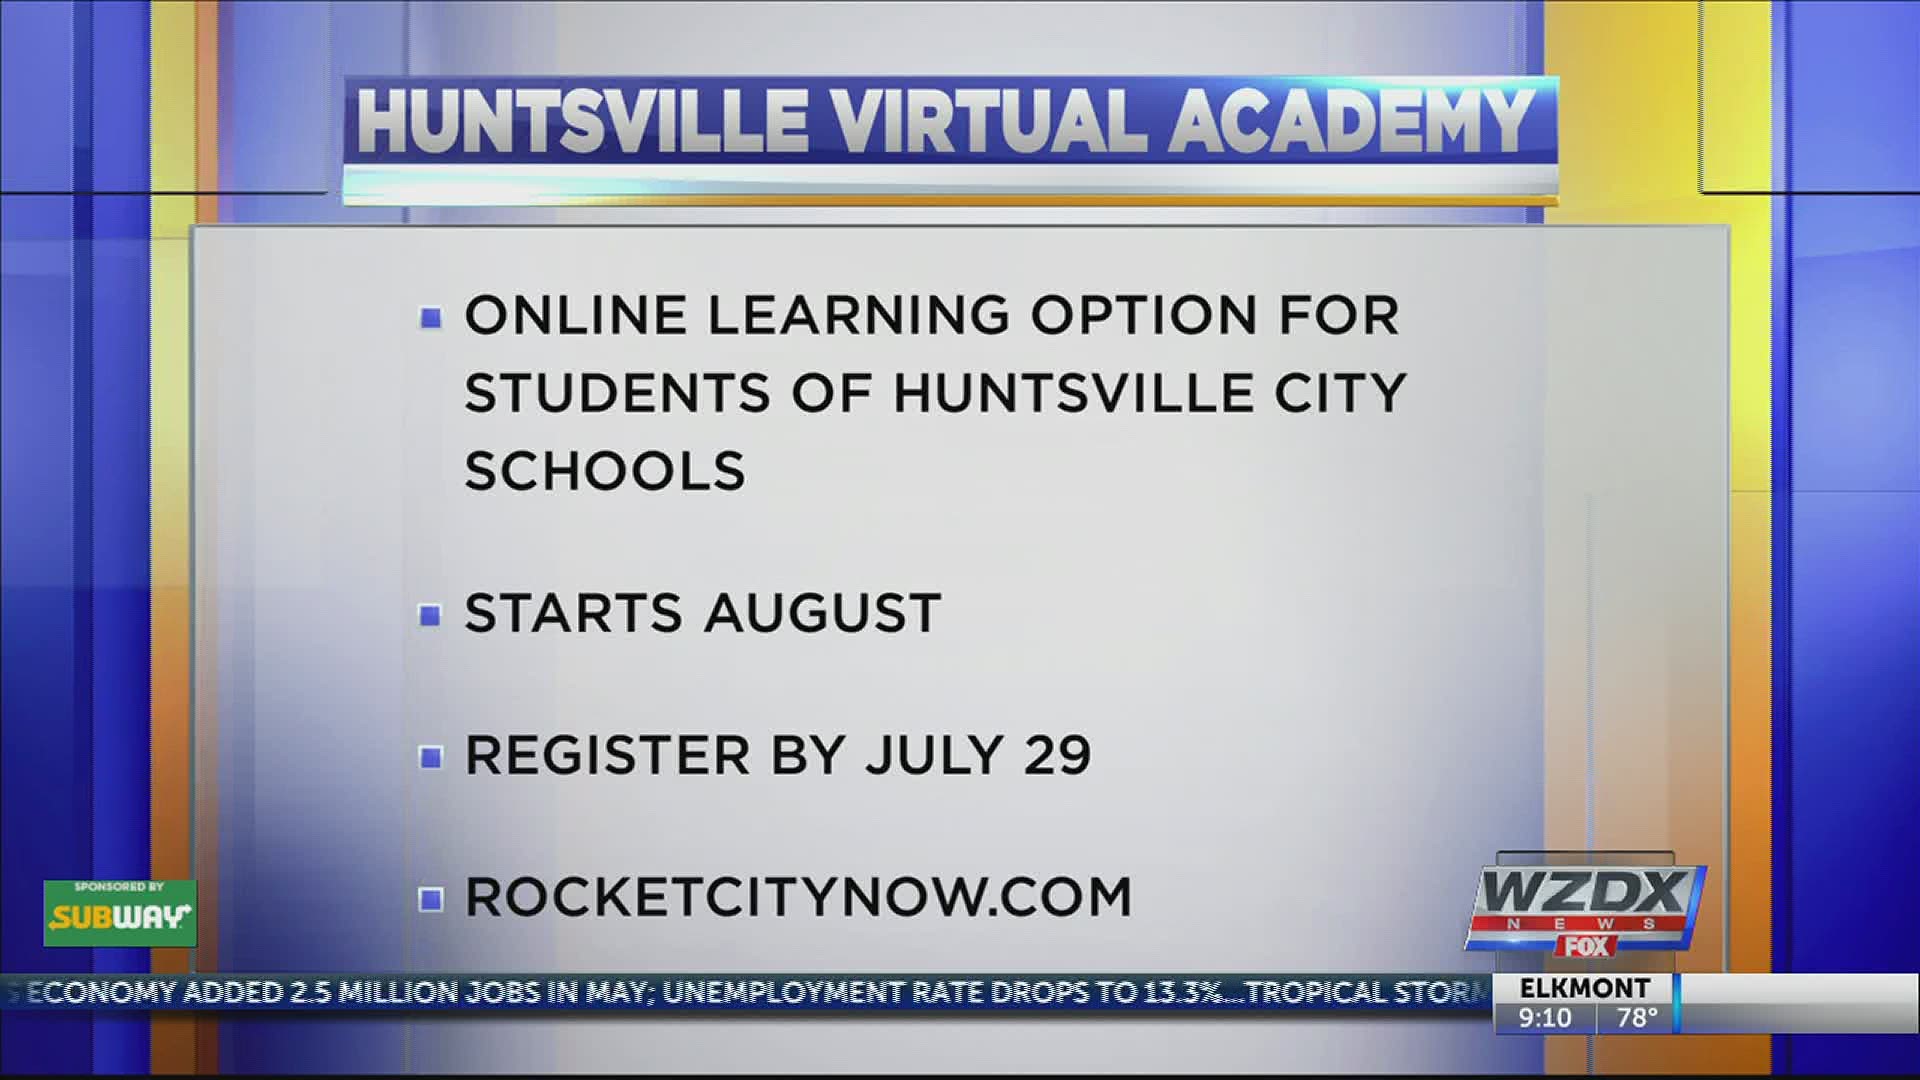 The new Virtual Academy from Huntsville City Schools will offer a fully online learning experience.